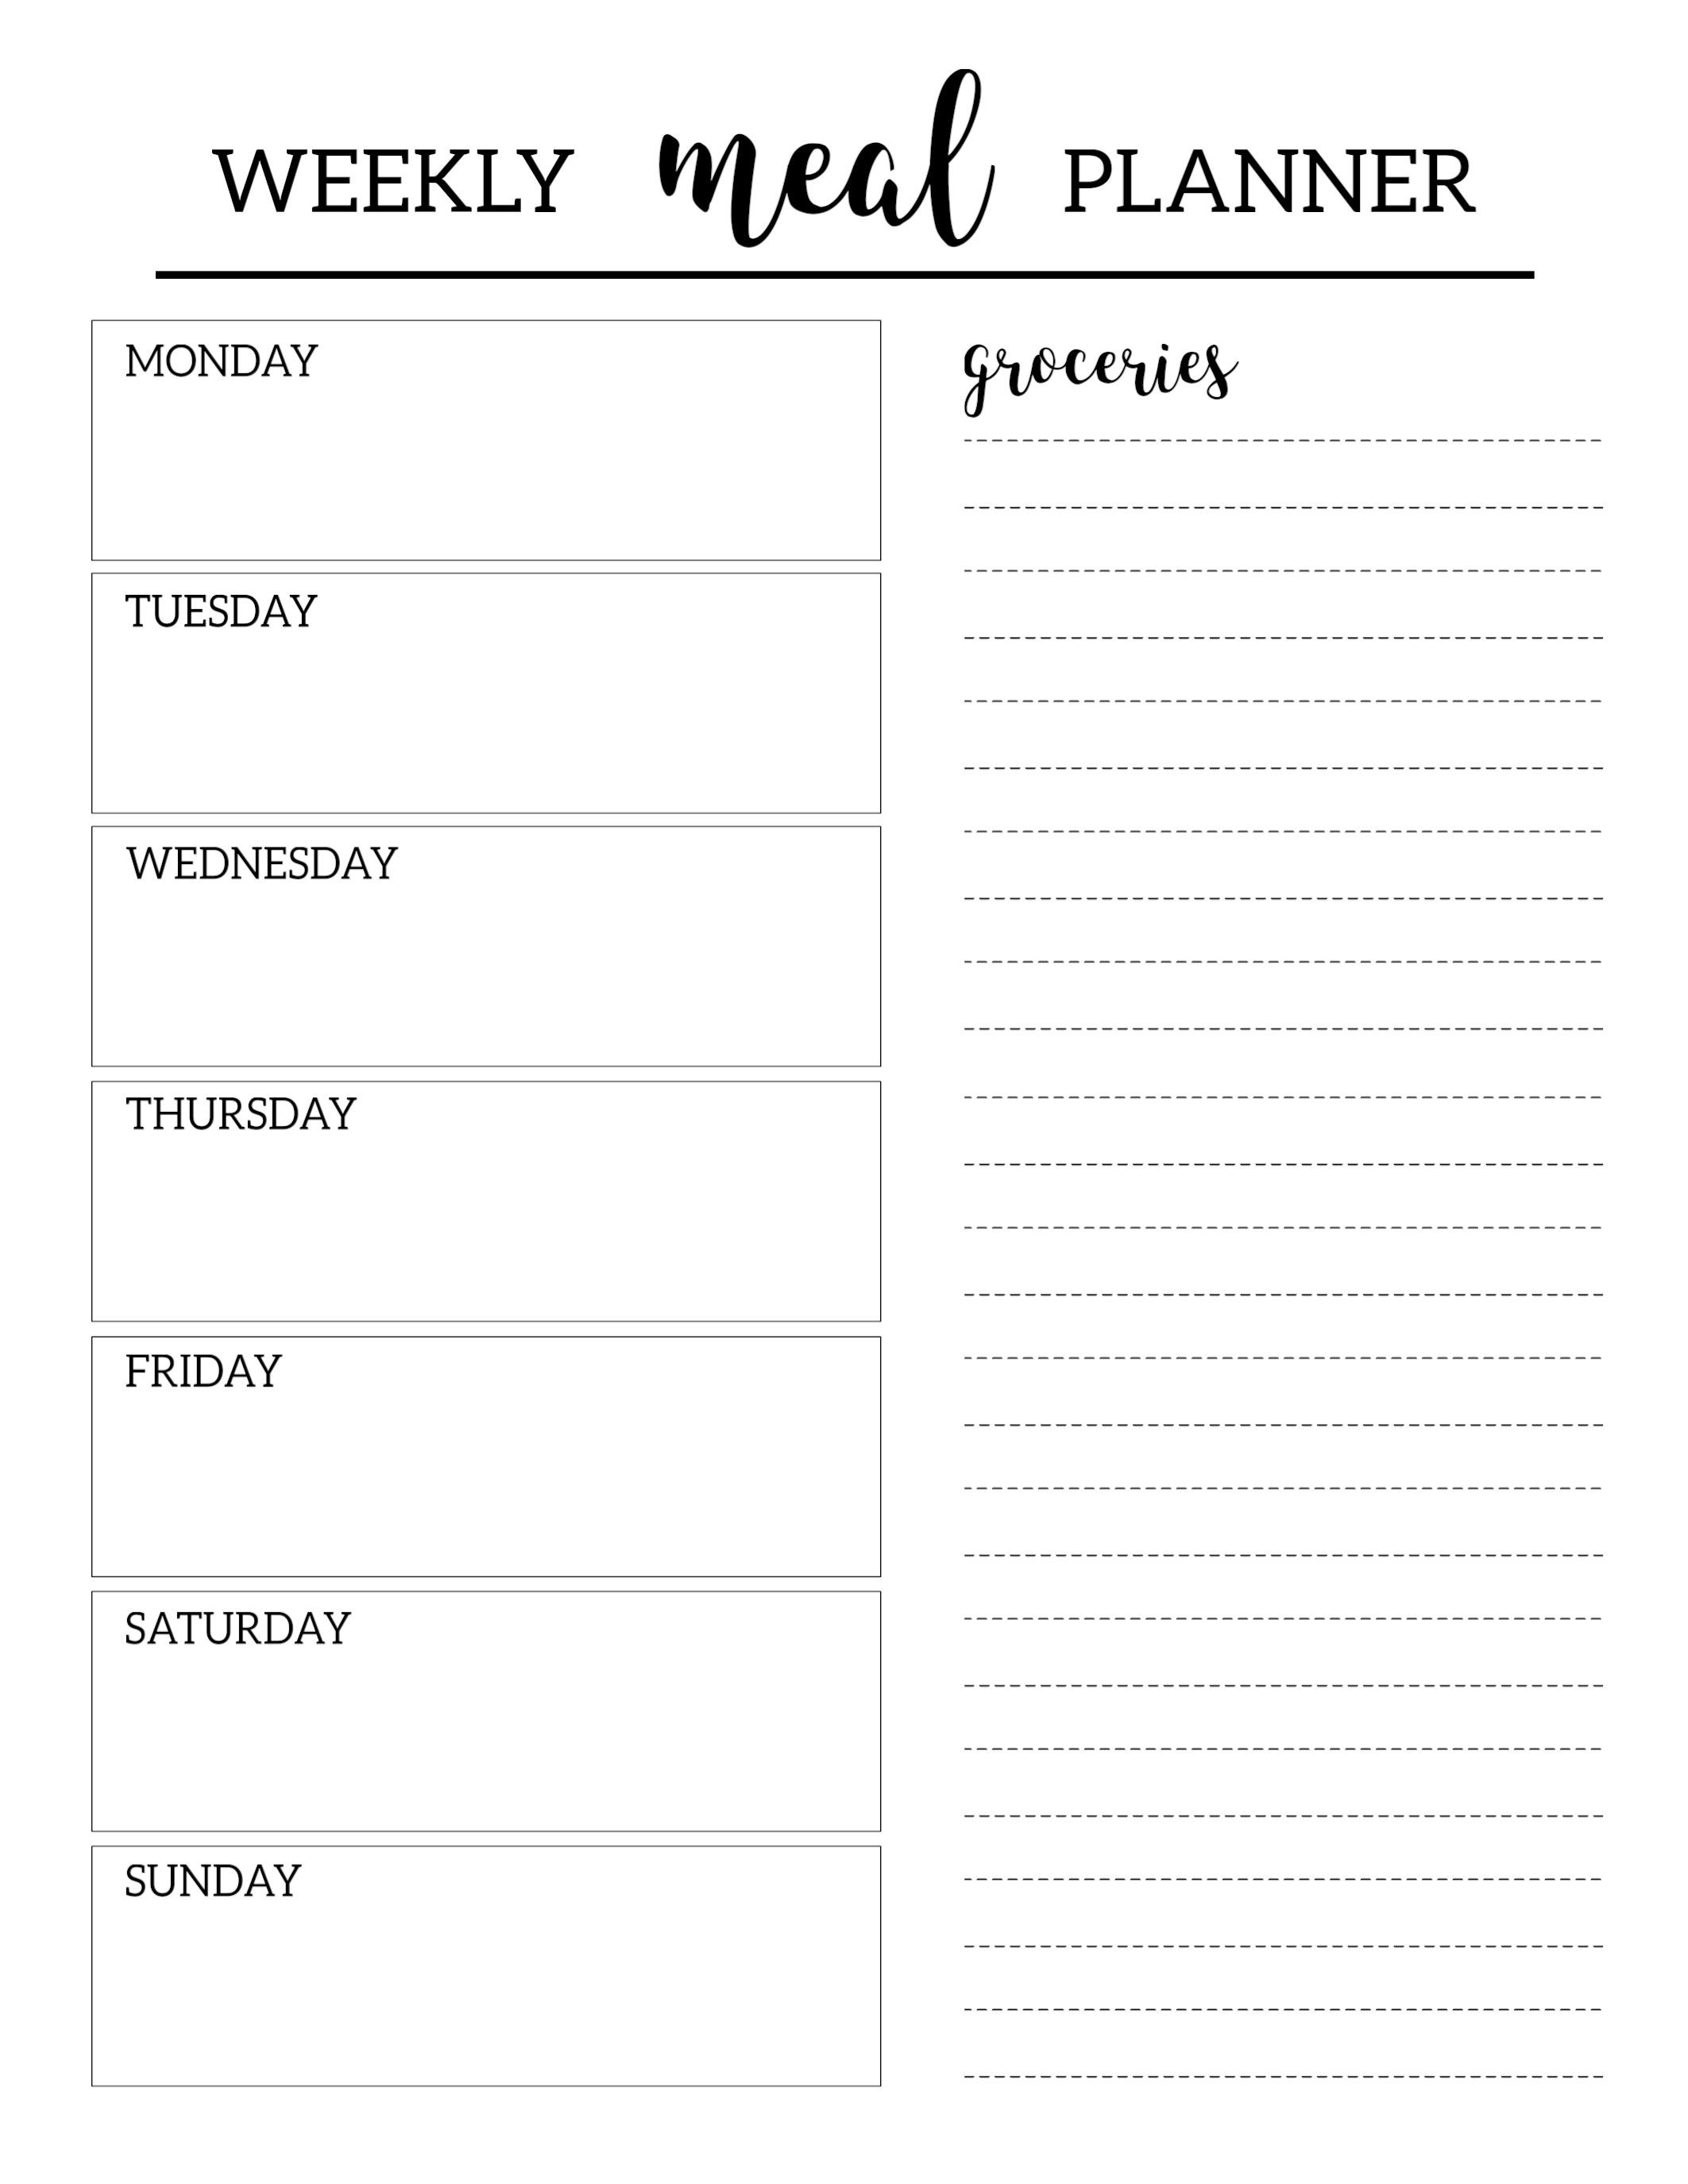 Free Printable Meal Planner Template | Organization | Pinterest - Free Printable Meal Planner